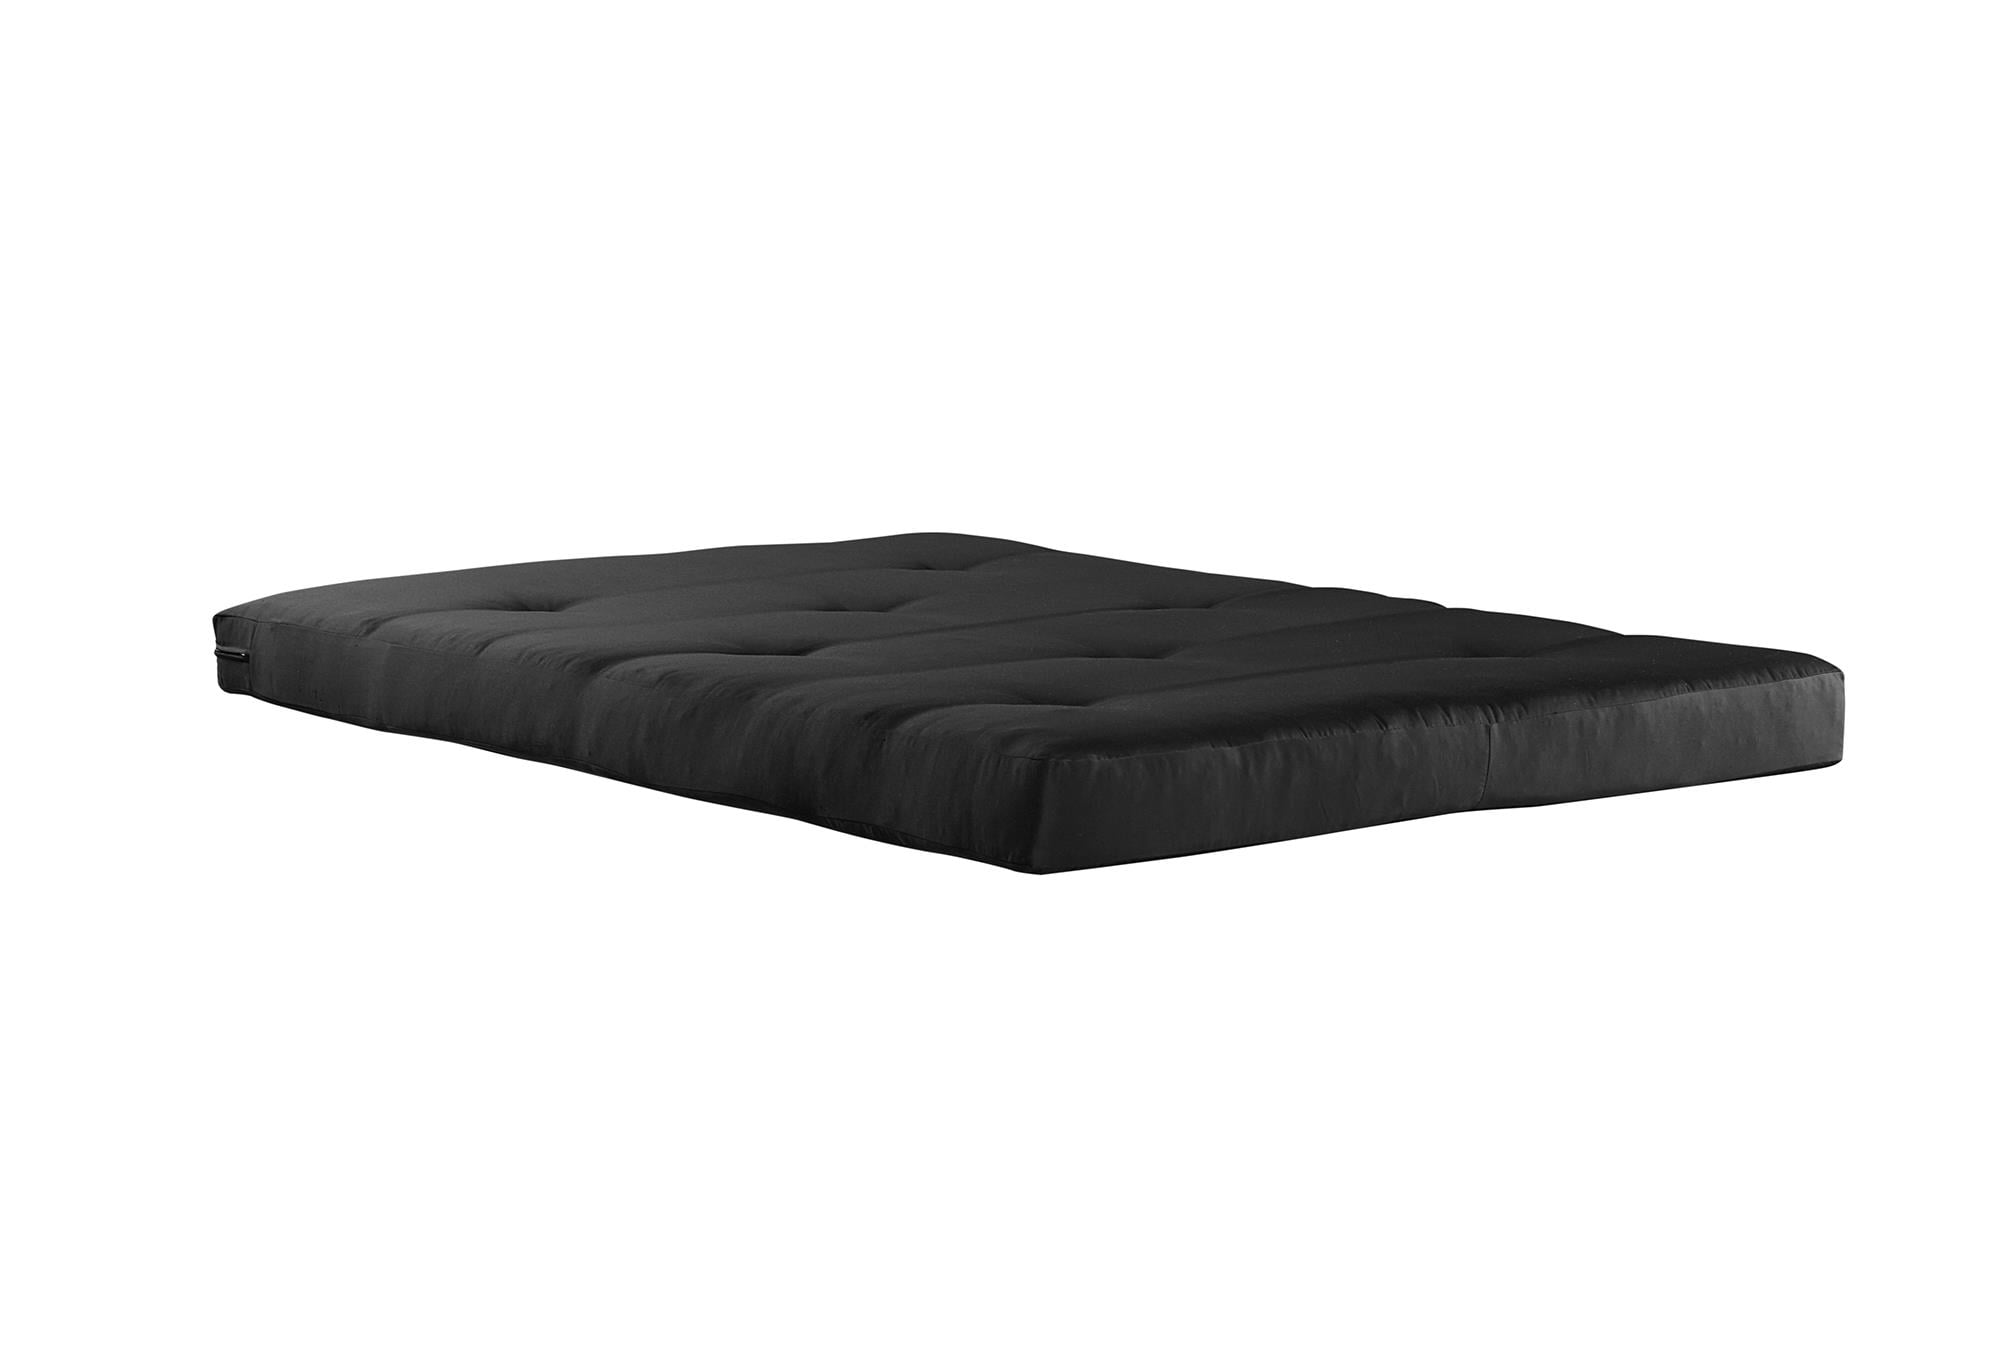 Futon Mattress Only 6" Full Size Tufted w/ Twill Cotton Microfiber Cover Black 